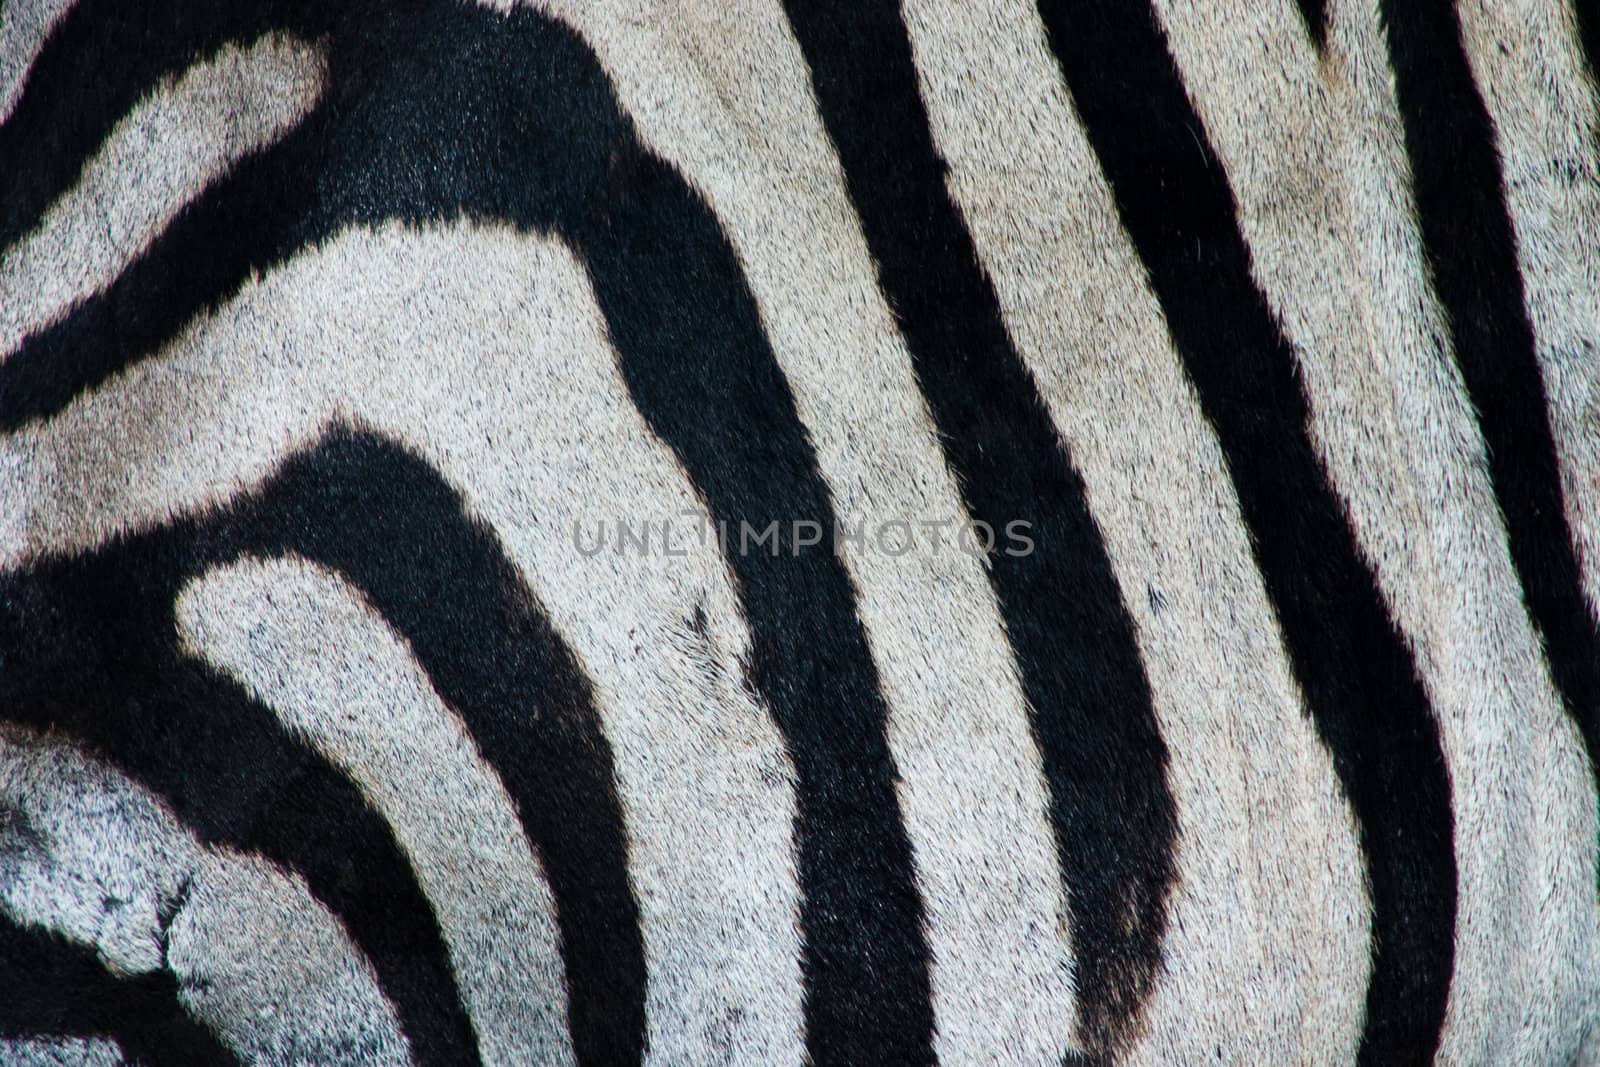 close up of a zebra's side showing the black and white stripes